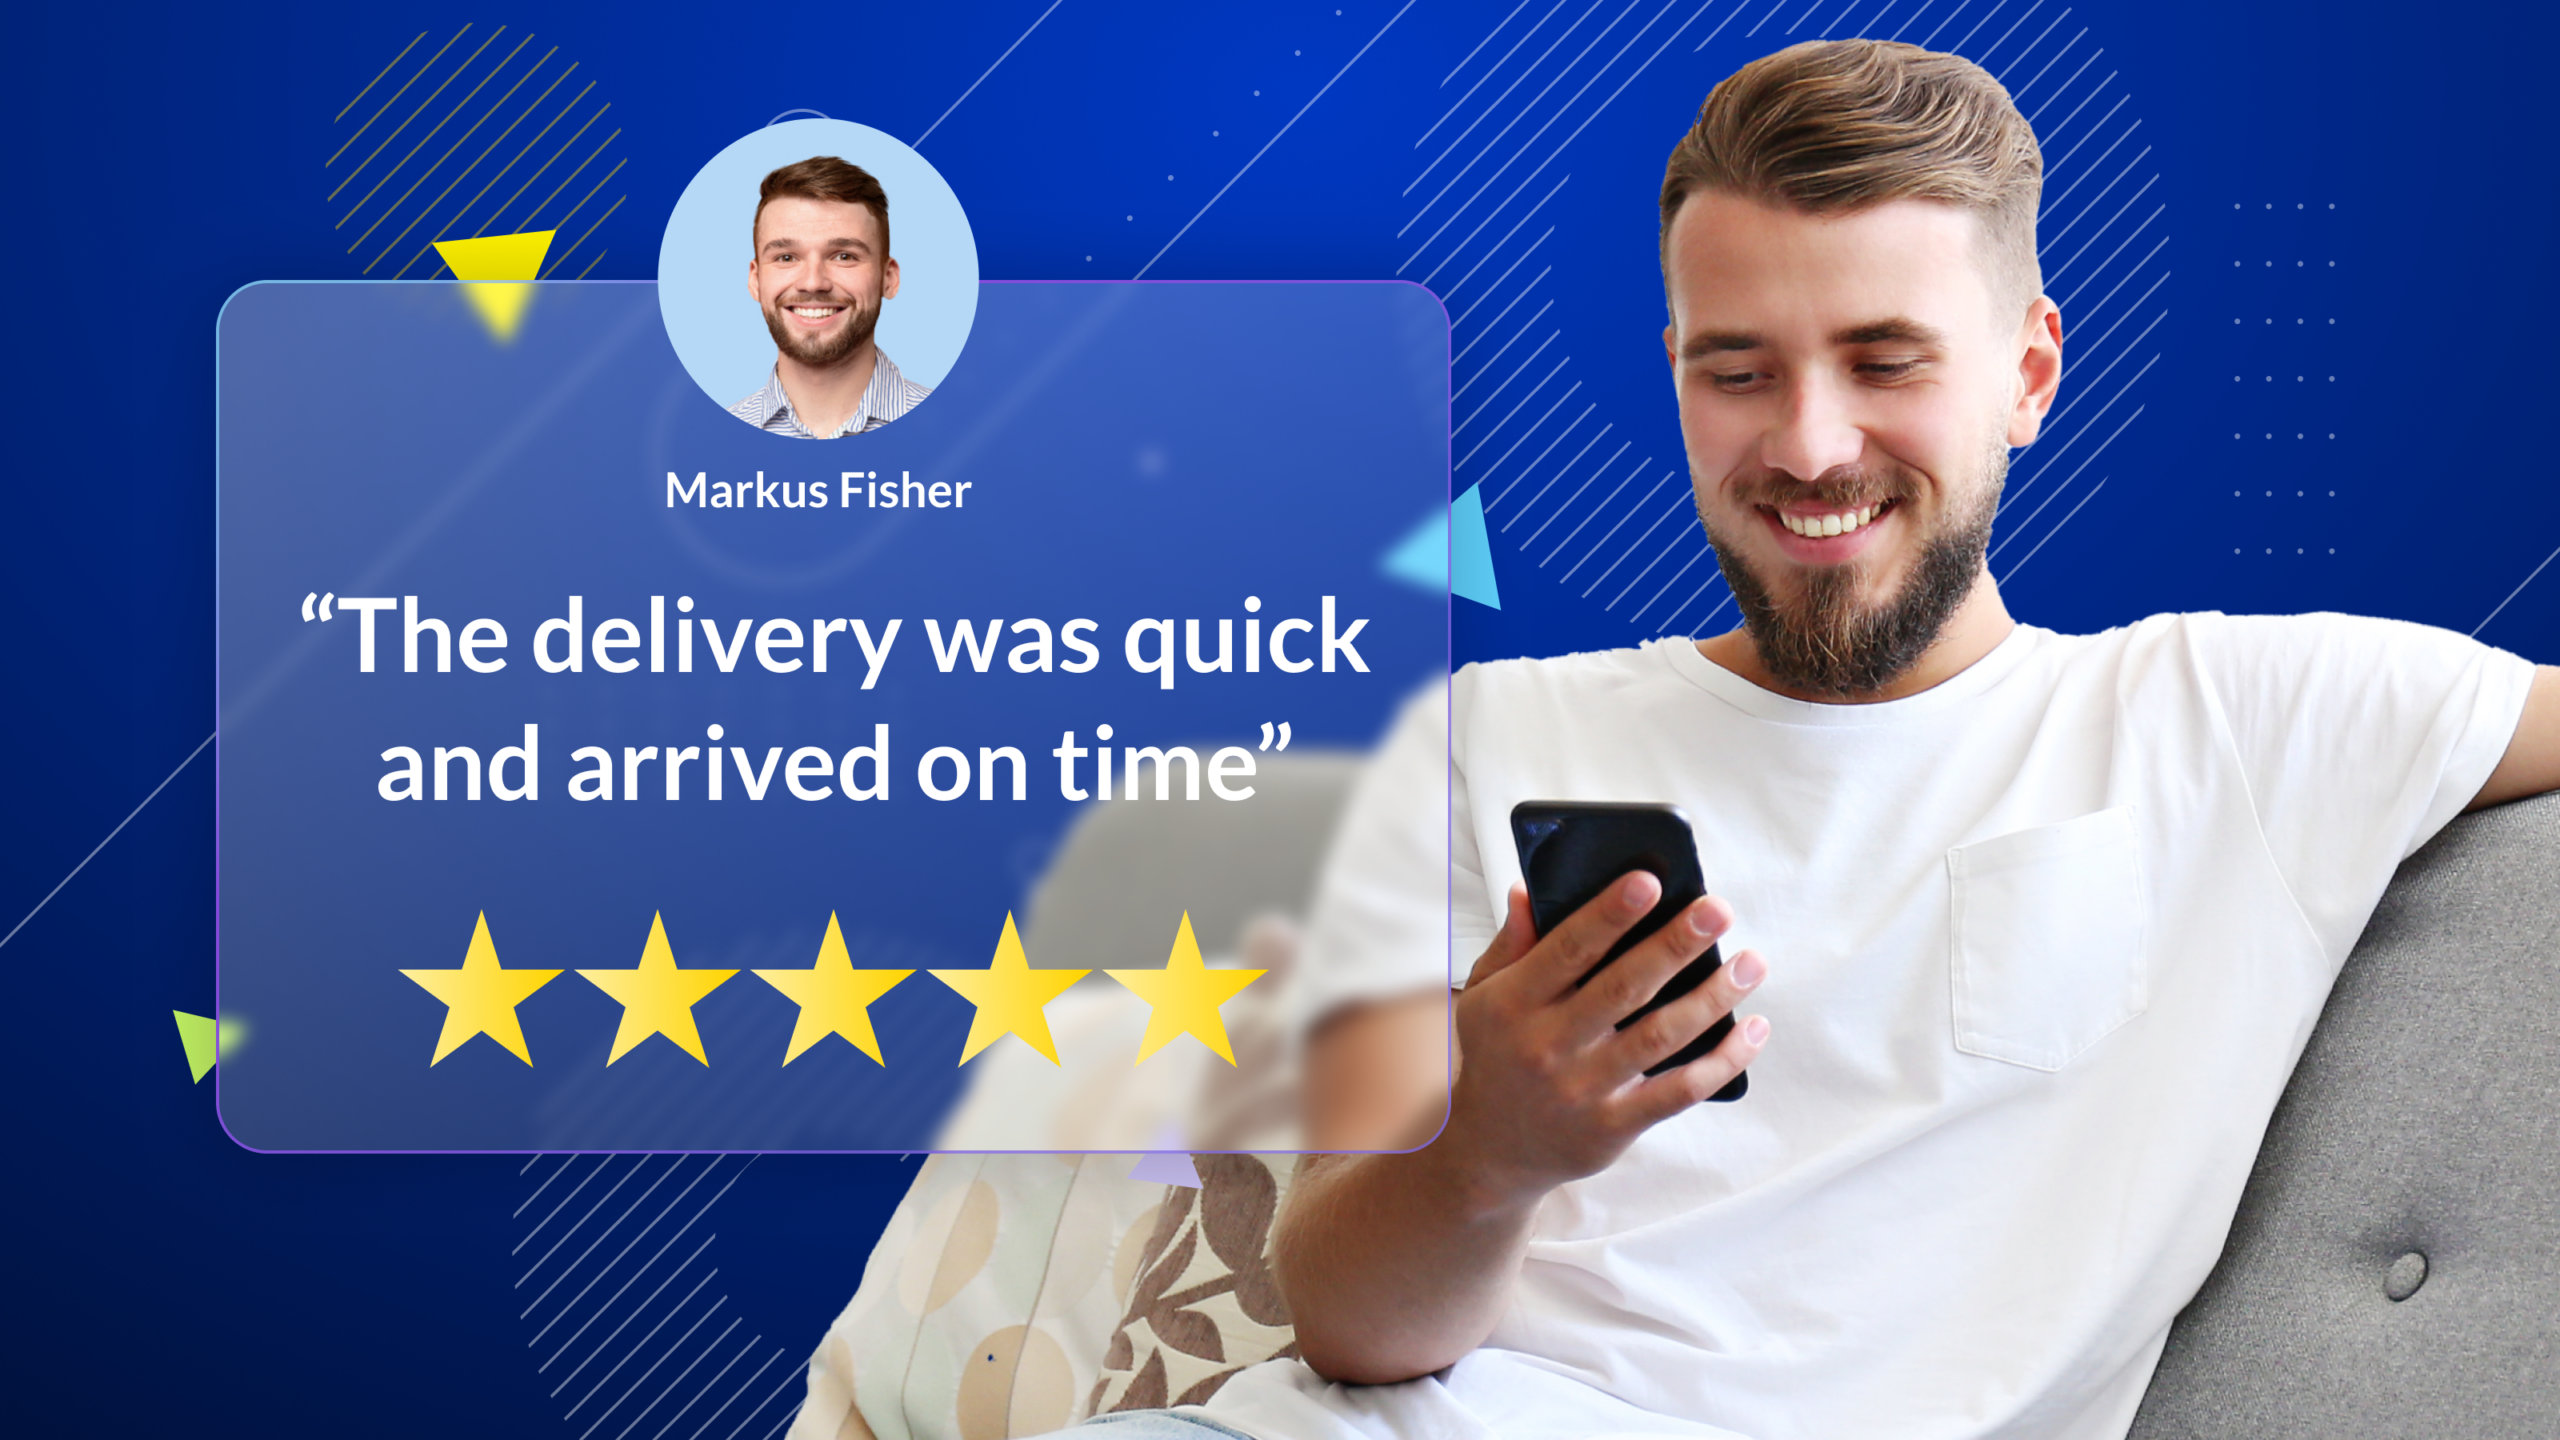 Customer review about the delivery experience